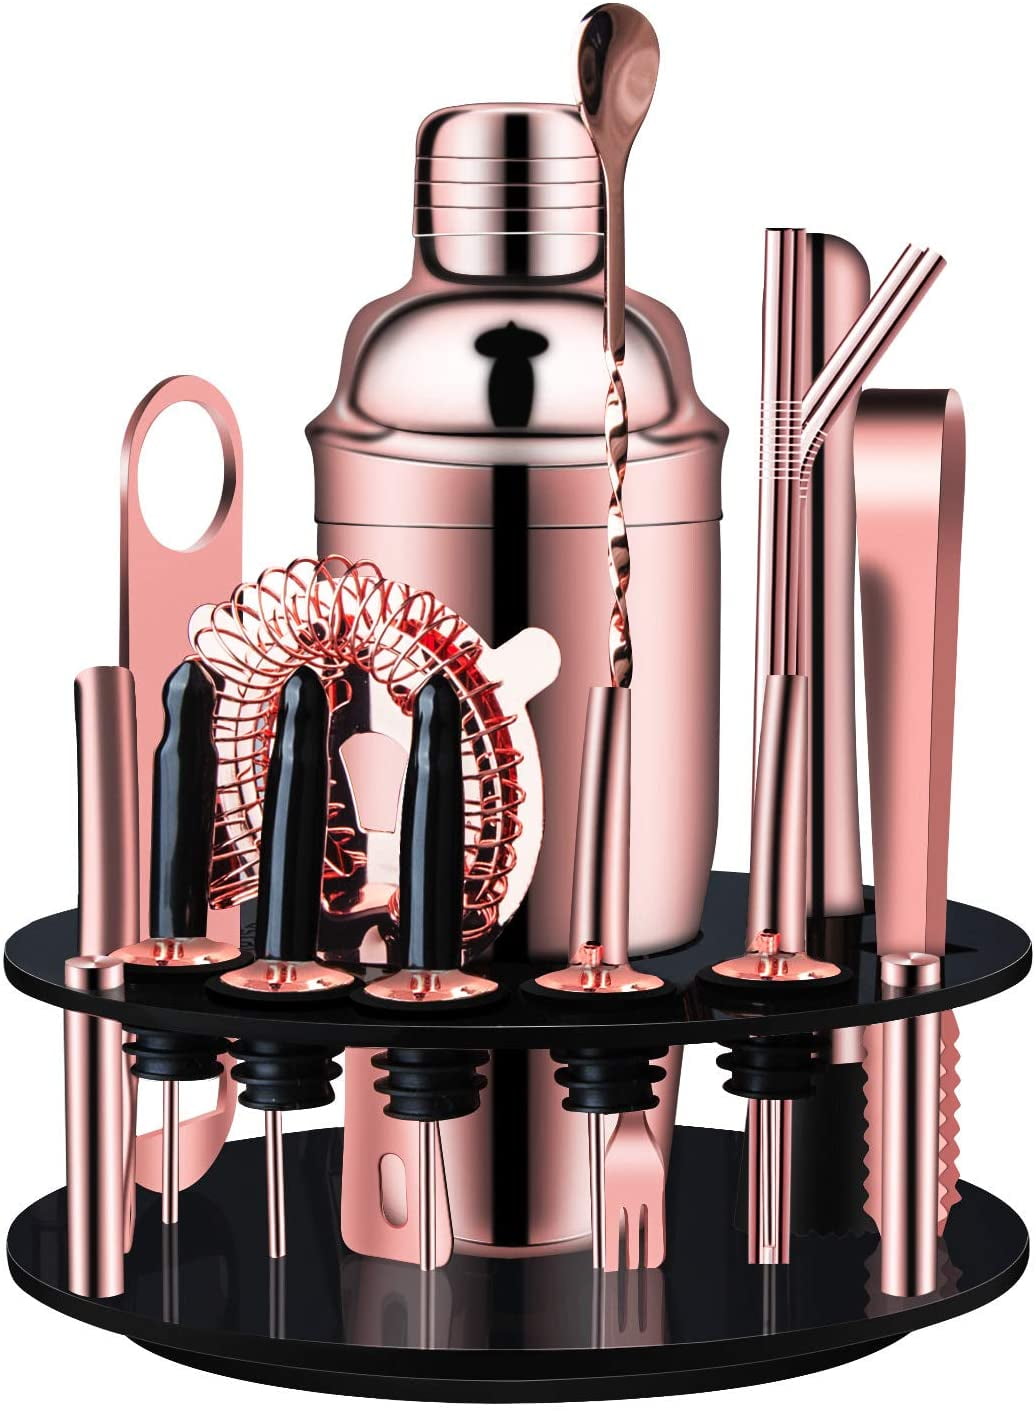 Bartender Kit,20-Piece Rose Gold Cocktail Shaker Set With Rotating Acrylic  Stand,For Mixed Drinks Martini Home Bar Tools